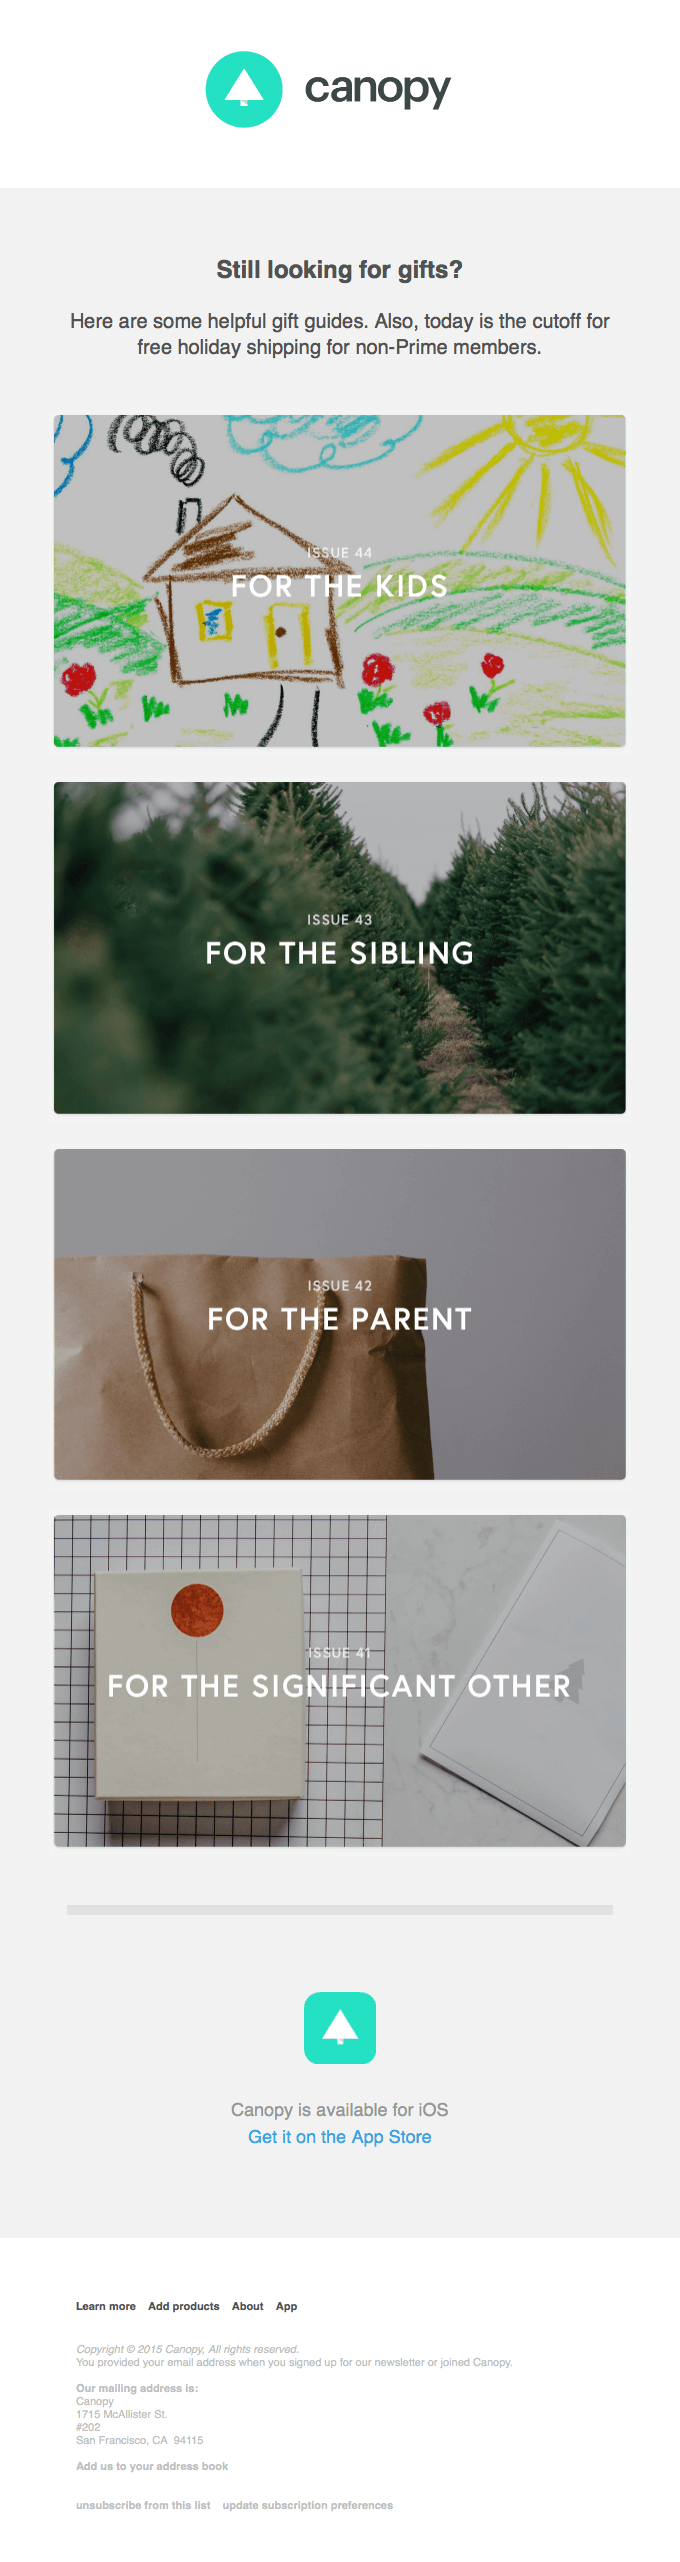 Canopy-Gift-Guide-Email